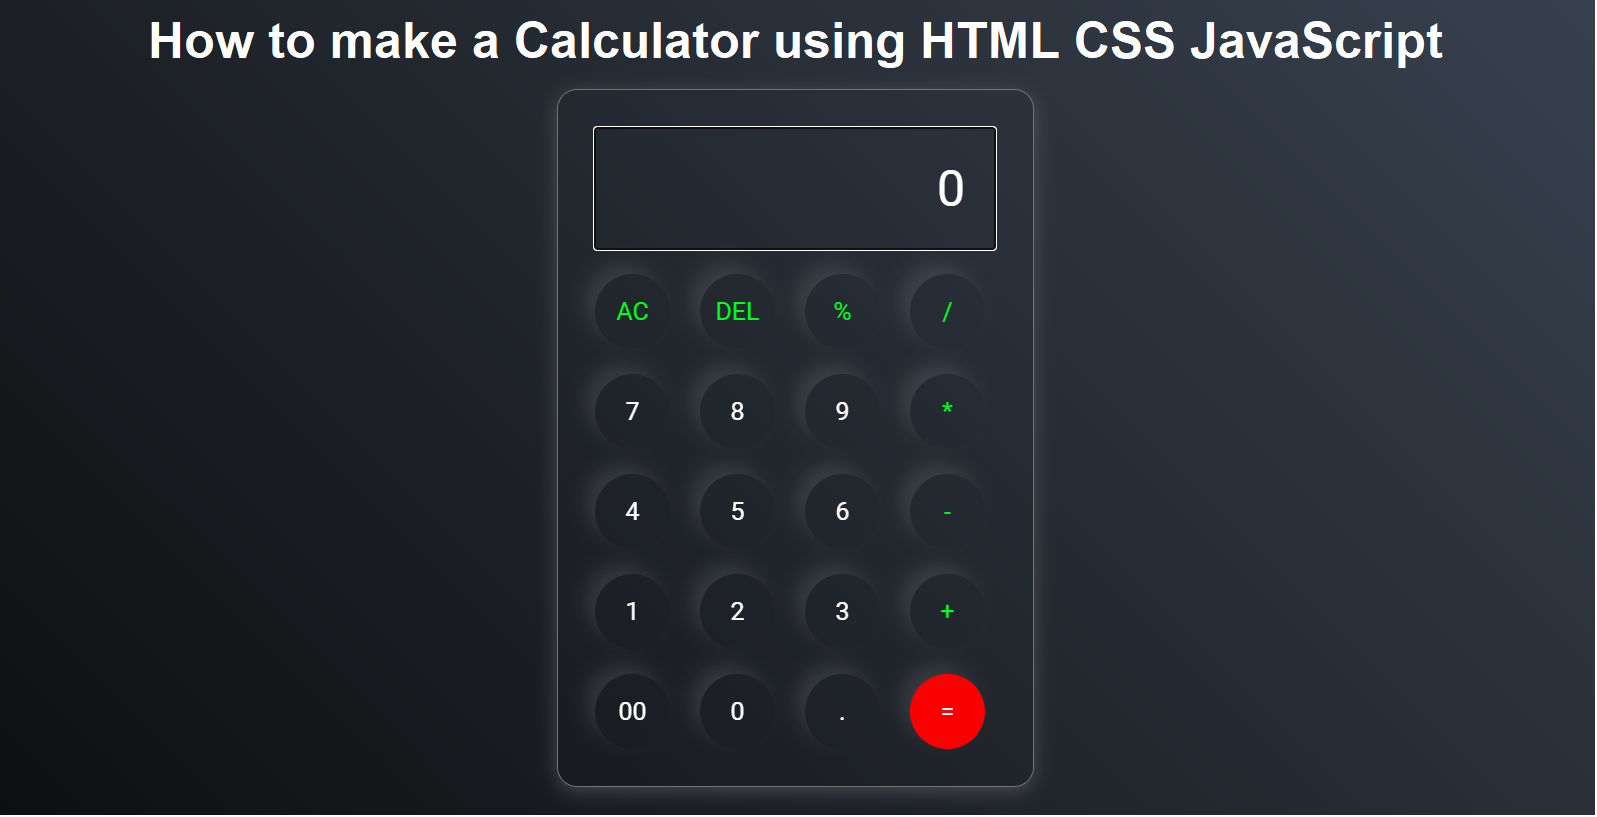 How to make a Calculator using HTML CSS JavaScript